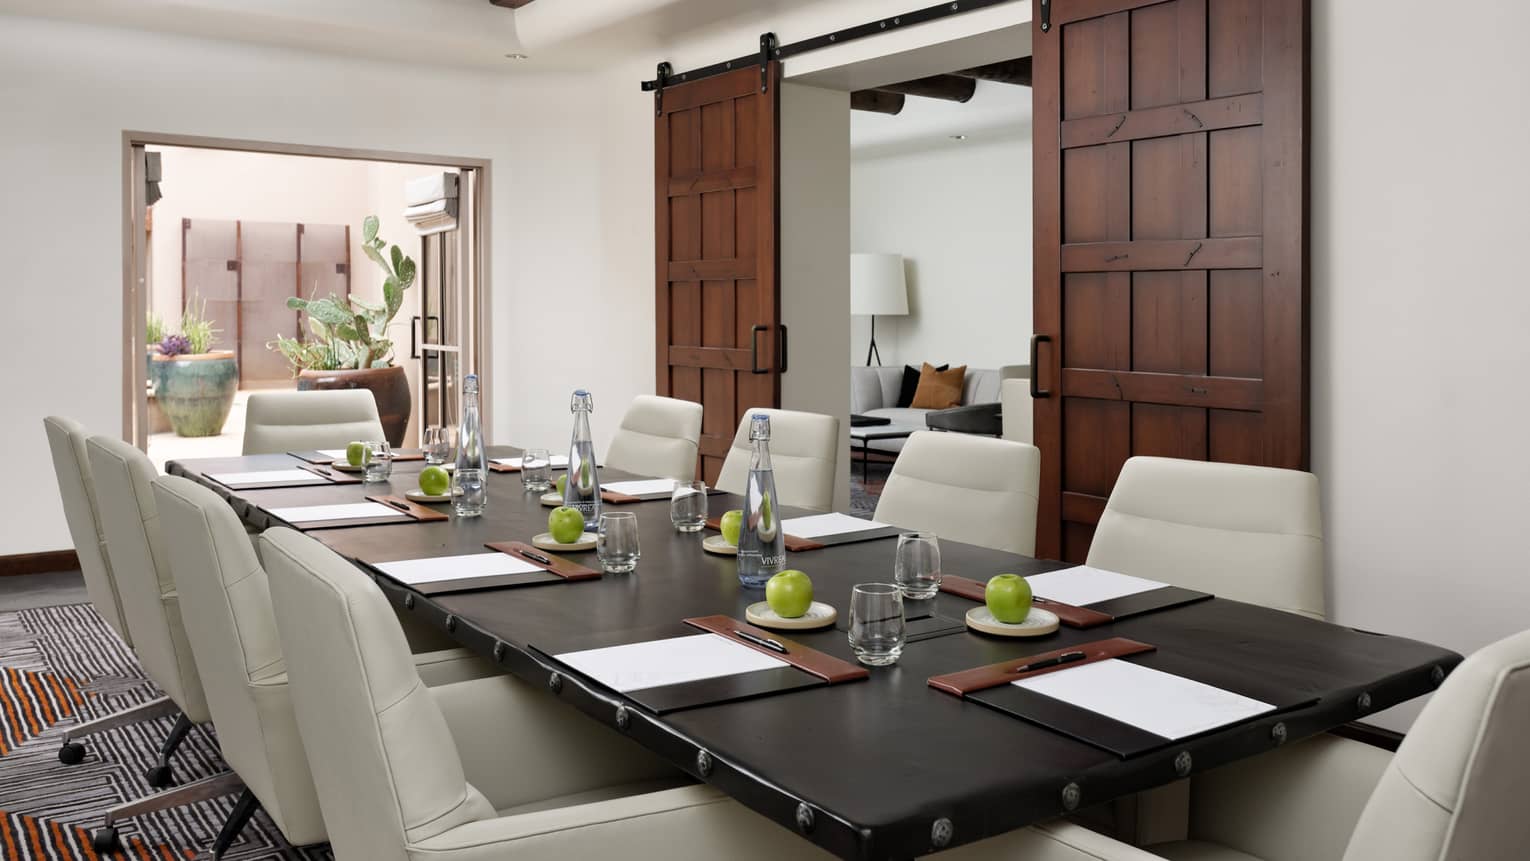 A meeting rom with leather chairs around a large rectangular table, two large wooden sliding door are on a wall.